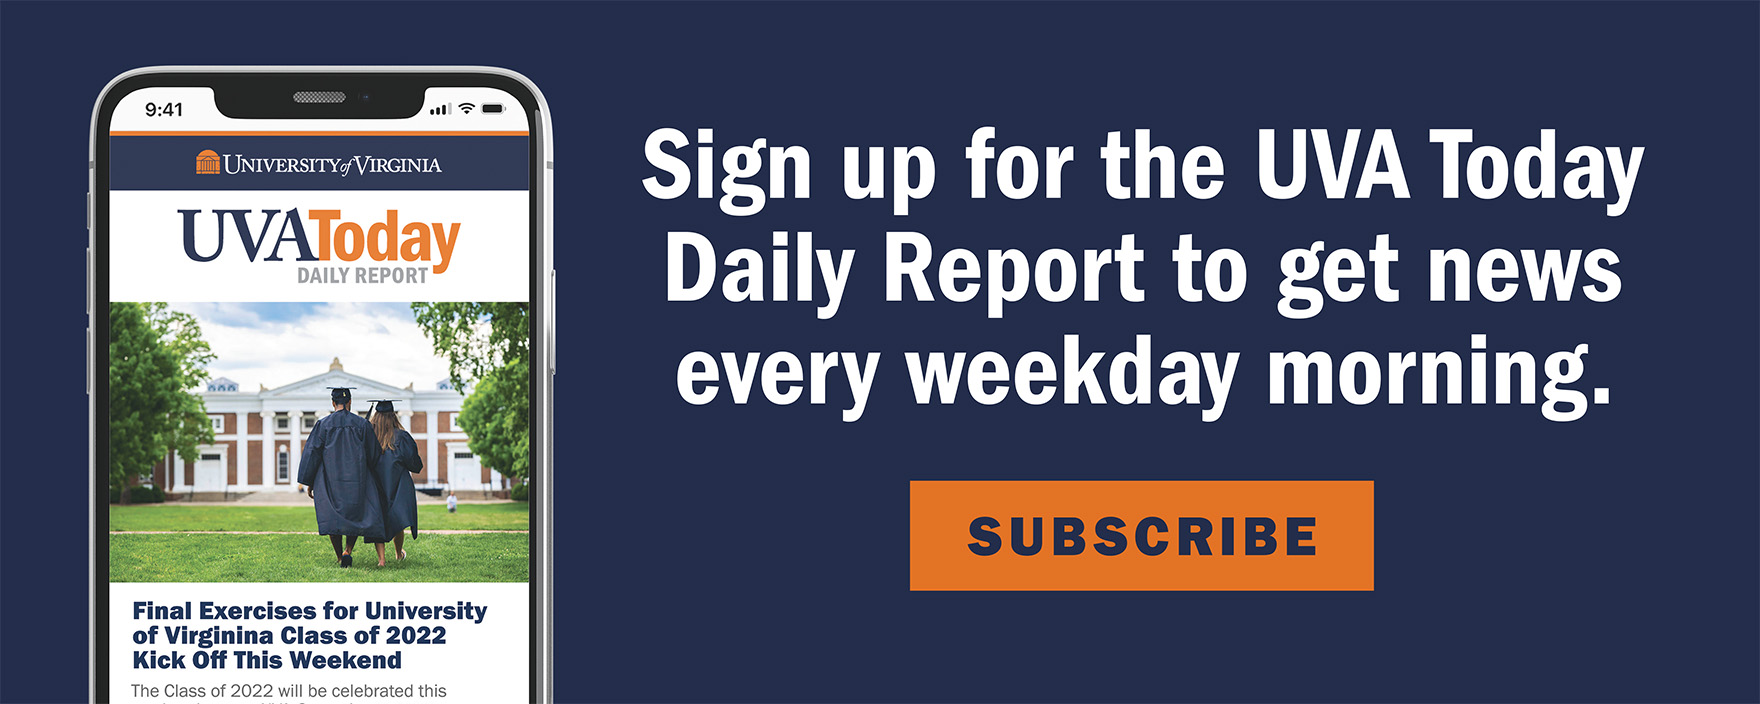 Sign up for the UVA Today Daily Report to get news every weekday morning.